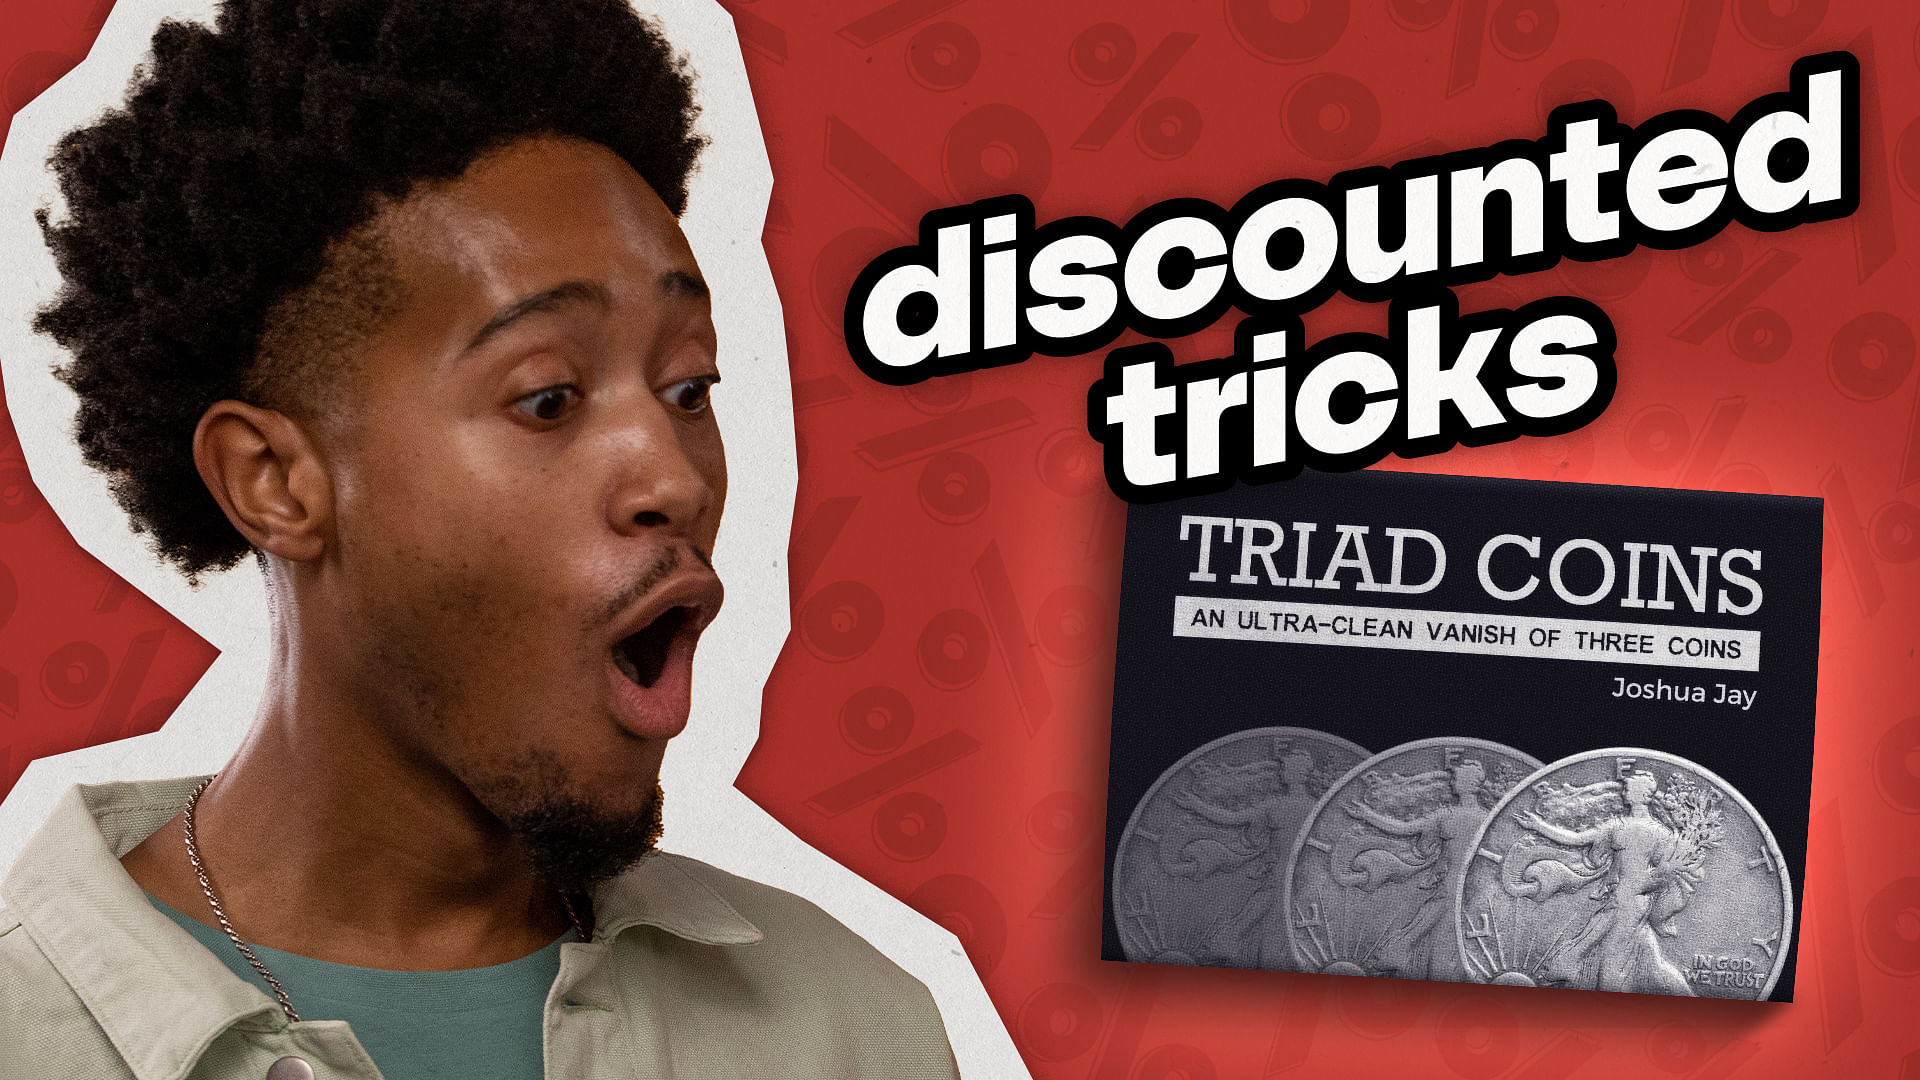 Discounted tricks